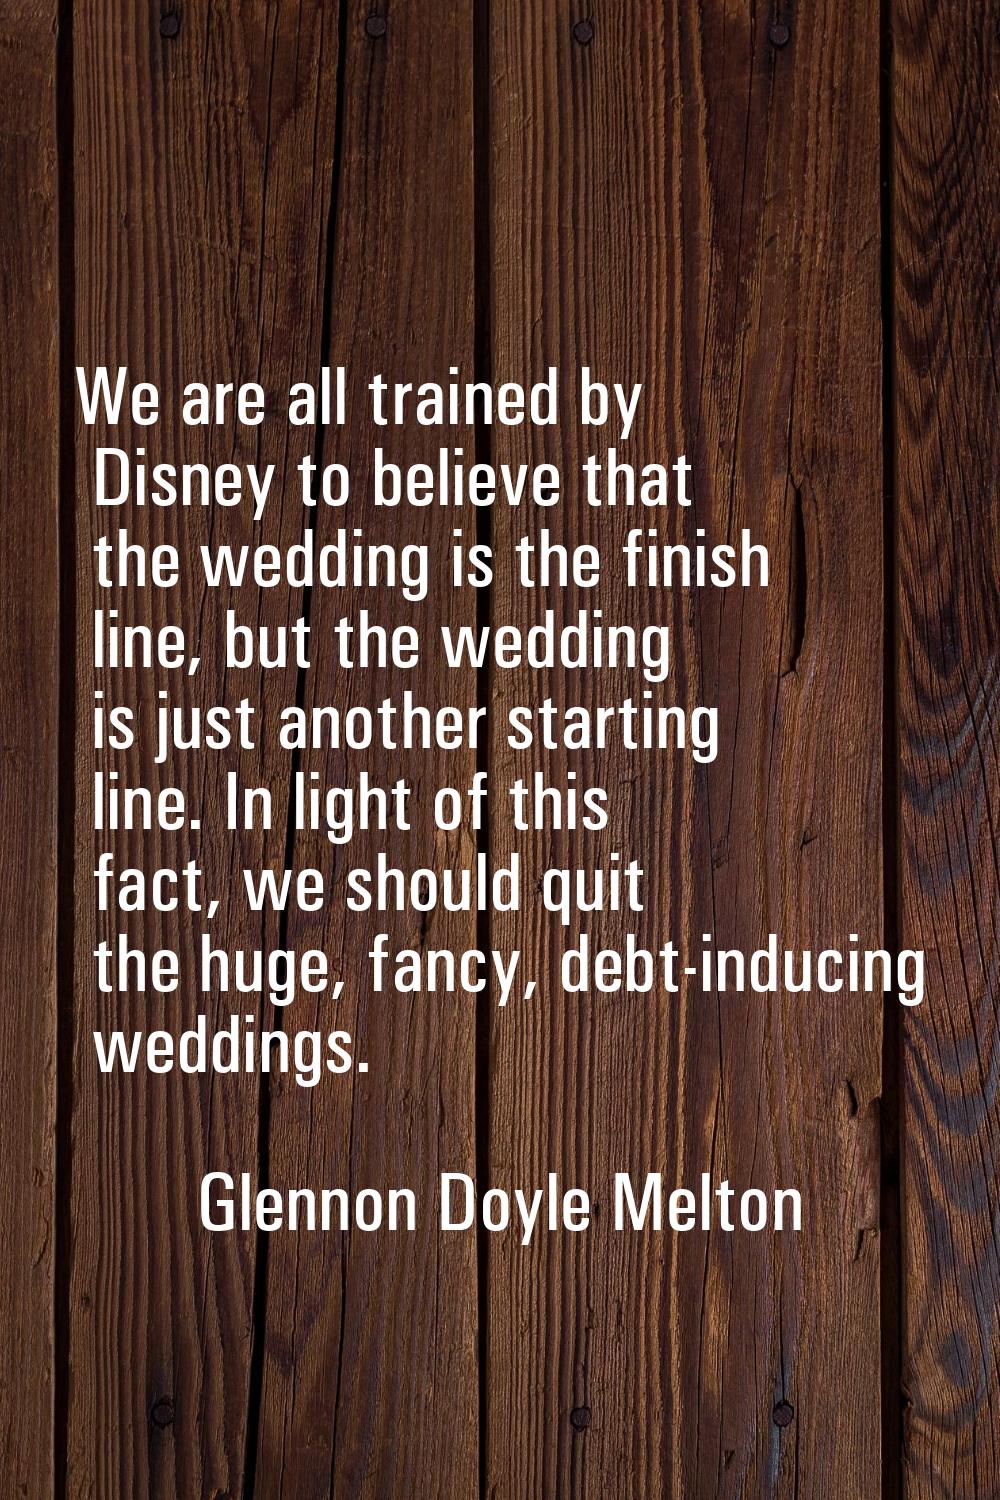 We are all trained by Disney to believe that the wedding is the finish line, but the wedding is jus